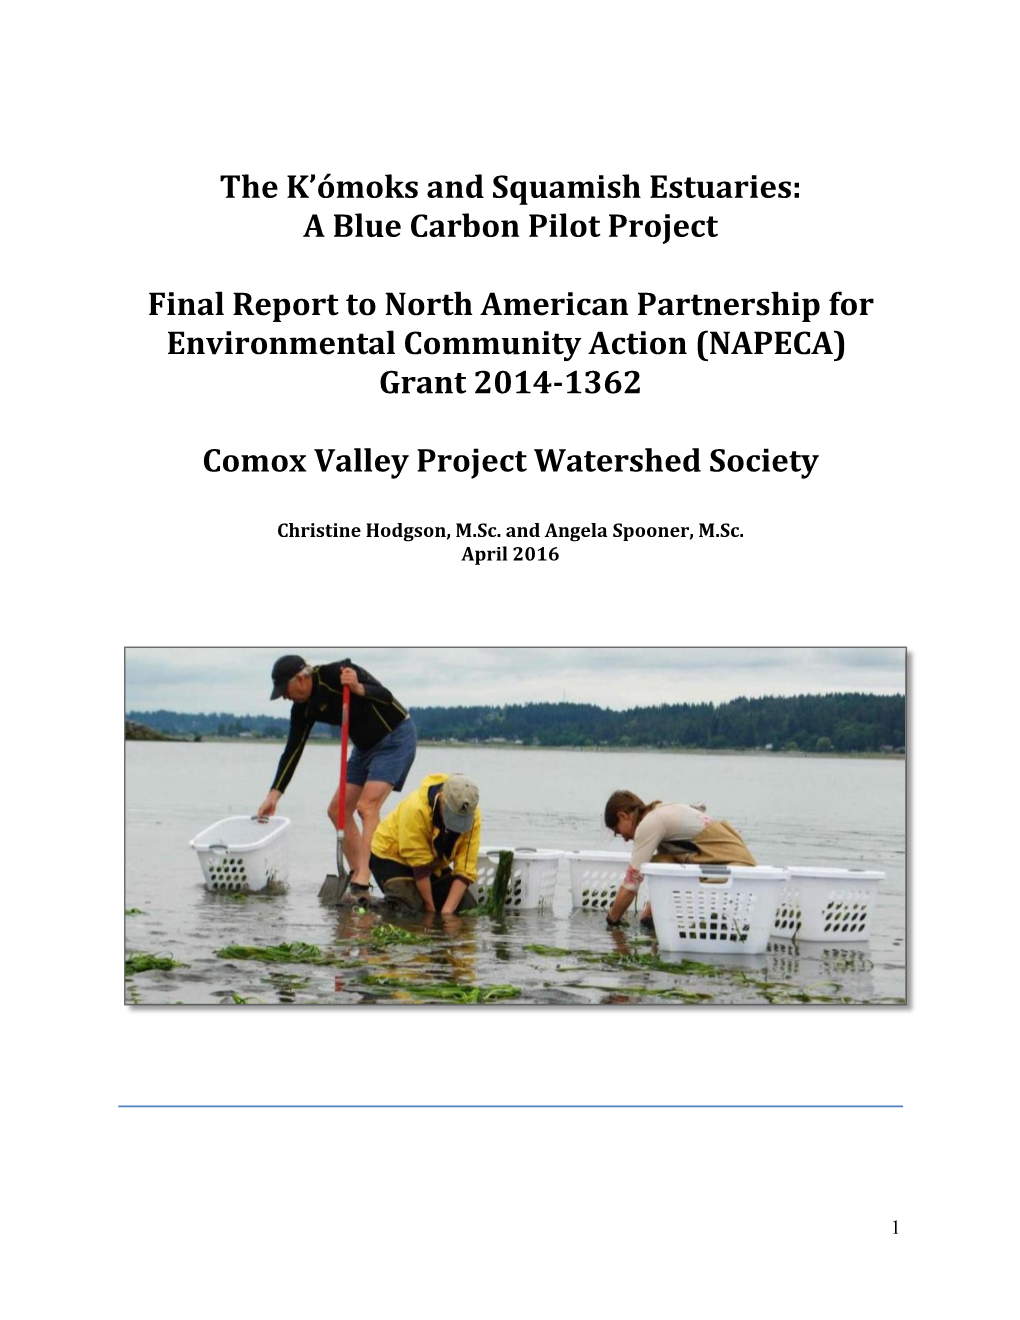 The K'ómoks and Squamish Estuaries: a Blue Carbon Pilot Project Final Report to North American Partnership for Environmenta